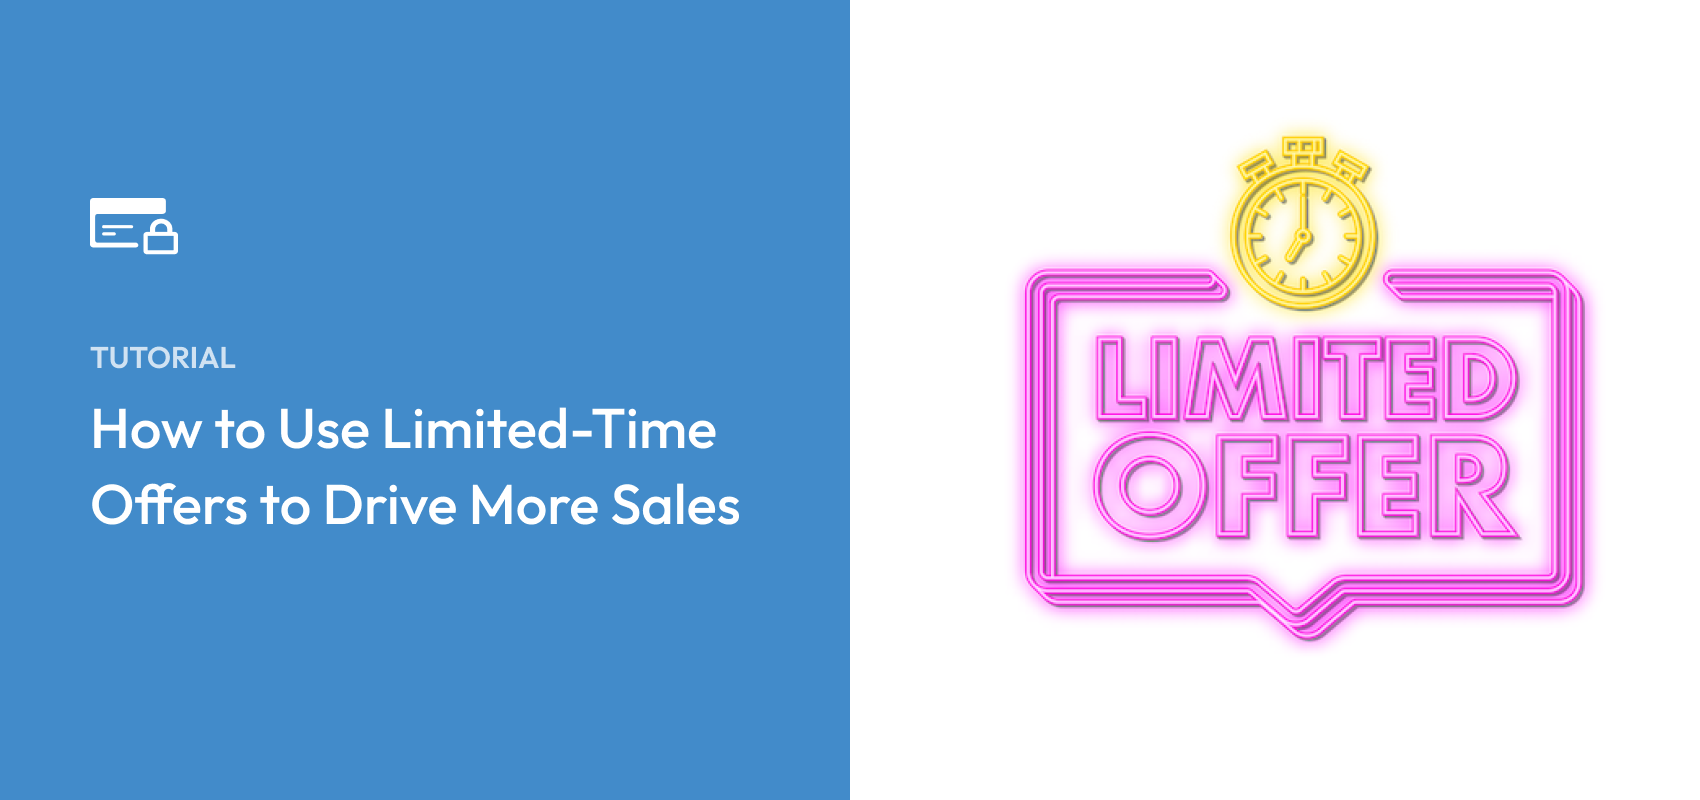 How to Use Limited-Time Offers to Drive More Sales